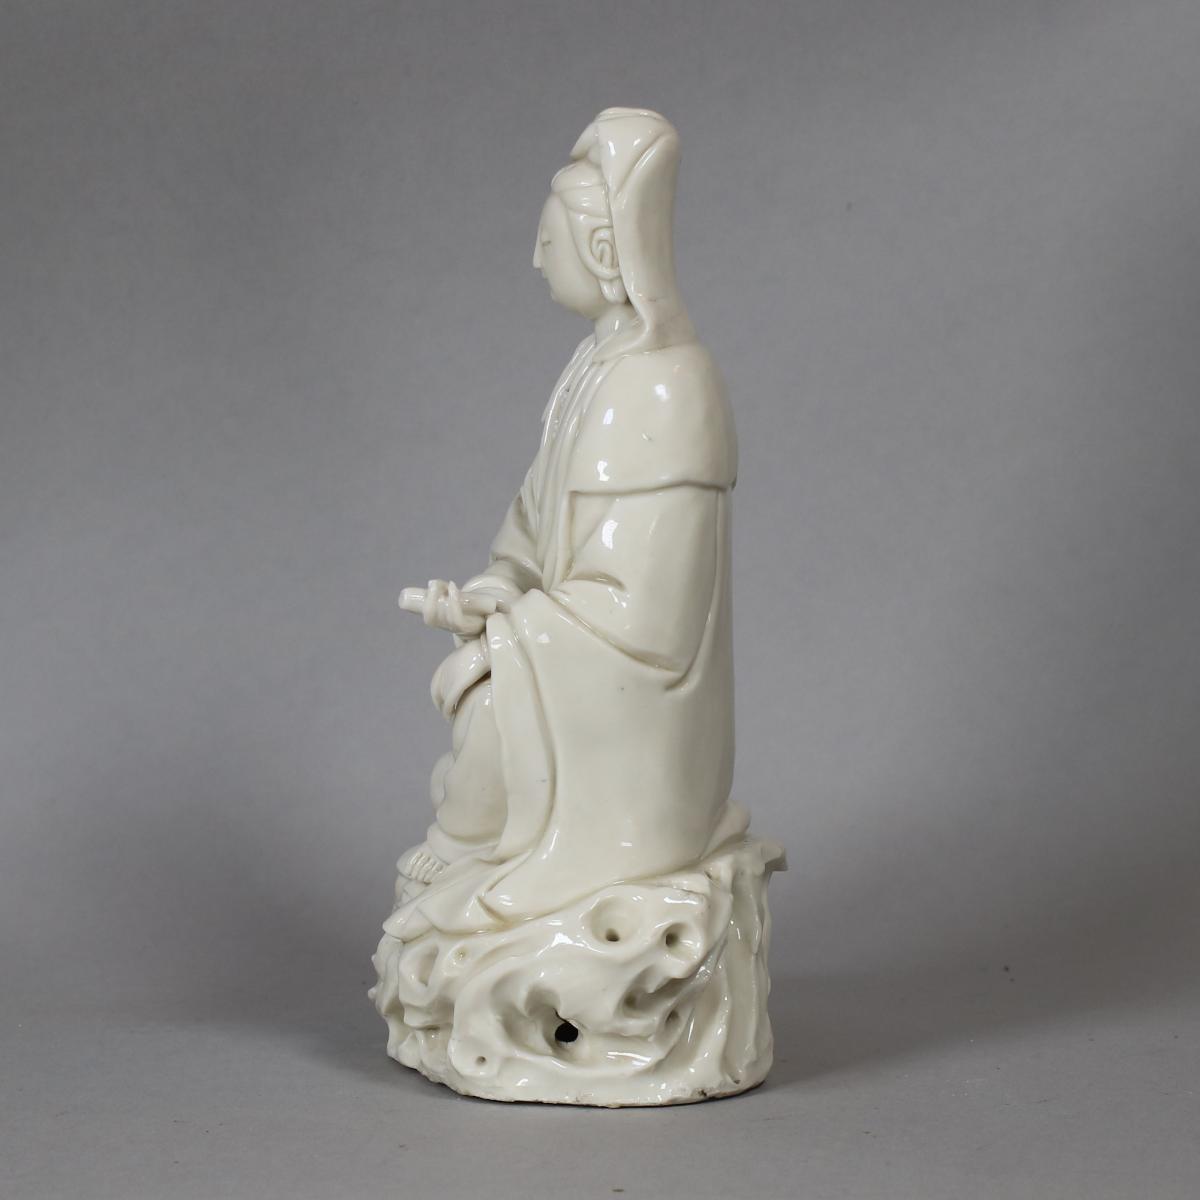 Chinese blanc de chine figure of Guanyin, side view